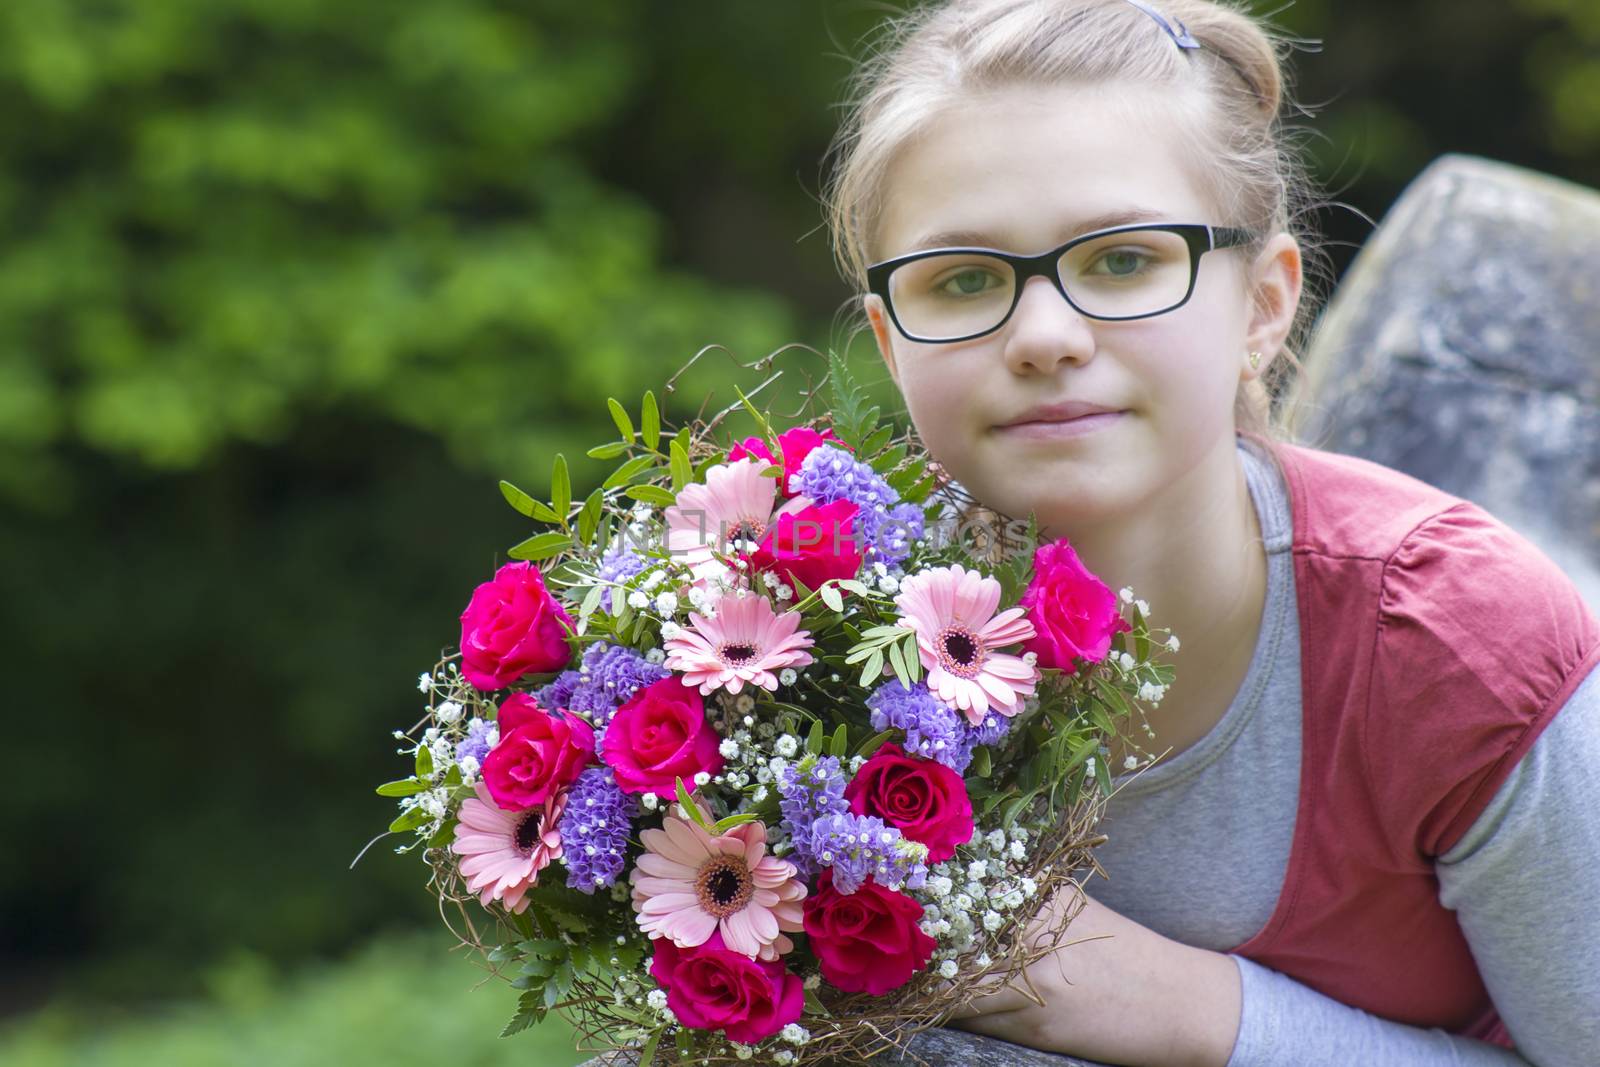 cute young girl with flowers - gift for the mother by miradrozdowski